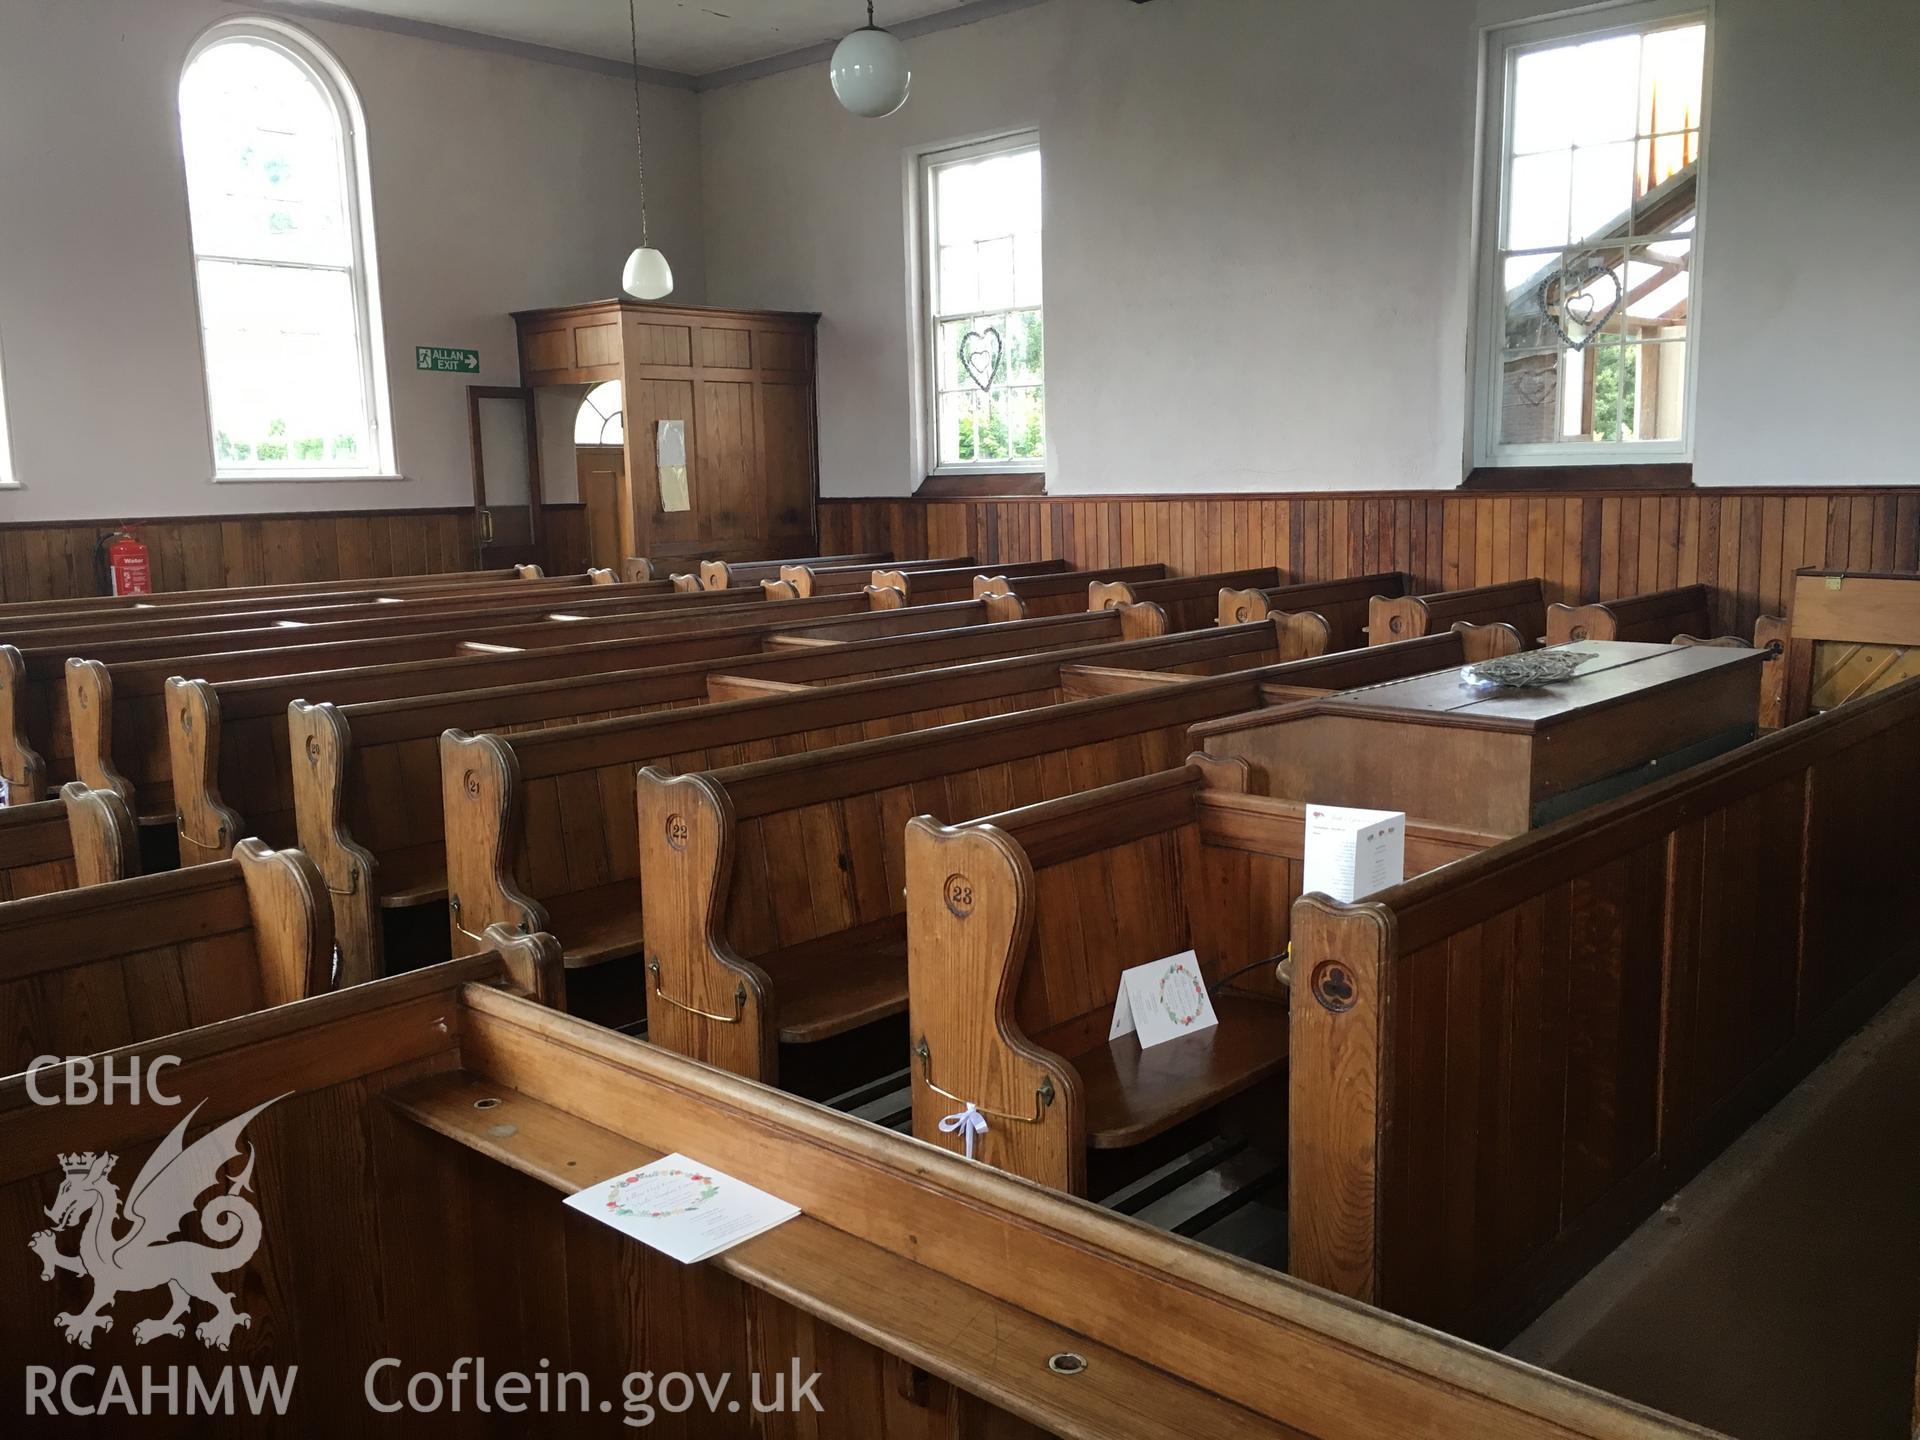 Photograph showing interior view before work began at the former Llawrybettws Welsh Calvinistic Methodist chapel, Glanyrafon, Corwen. Produced by Tim Allen on 18th August 2017 to meet a condition attached to planning application.